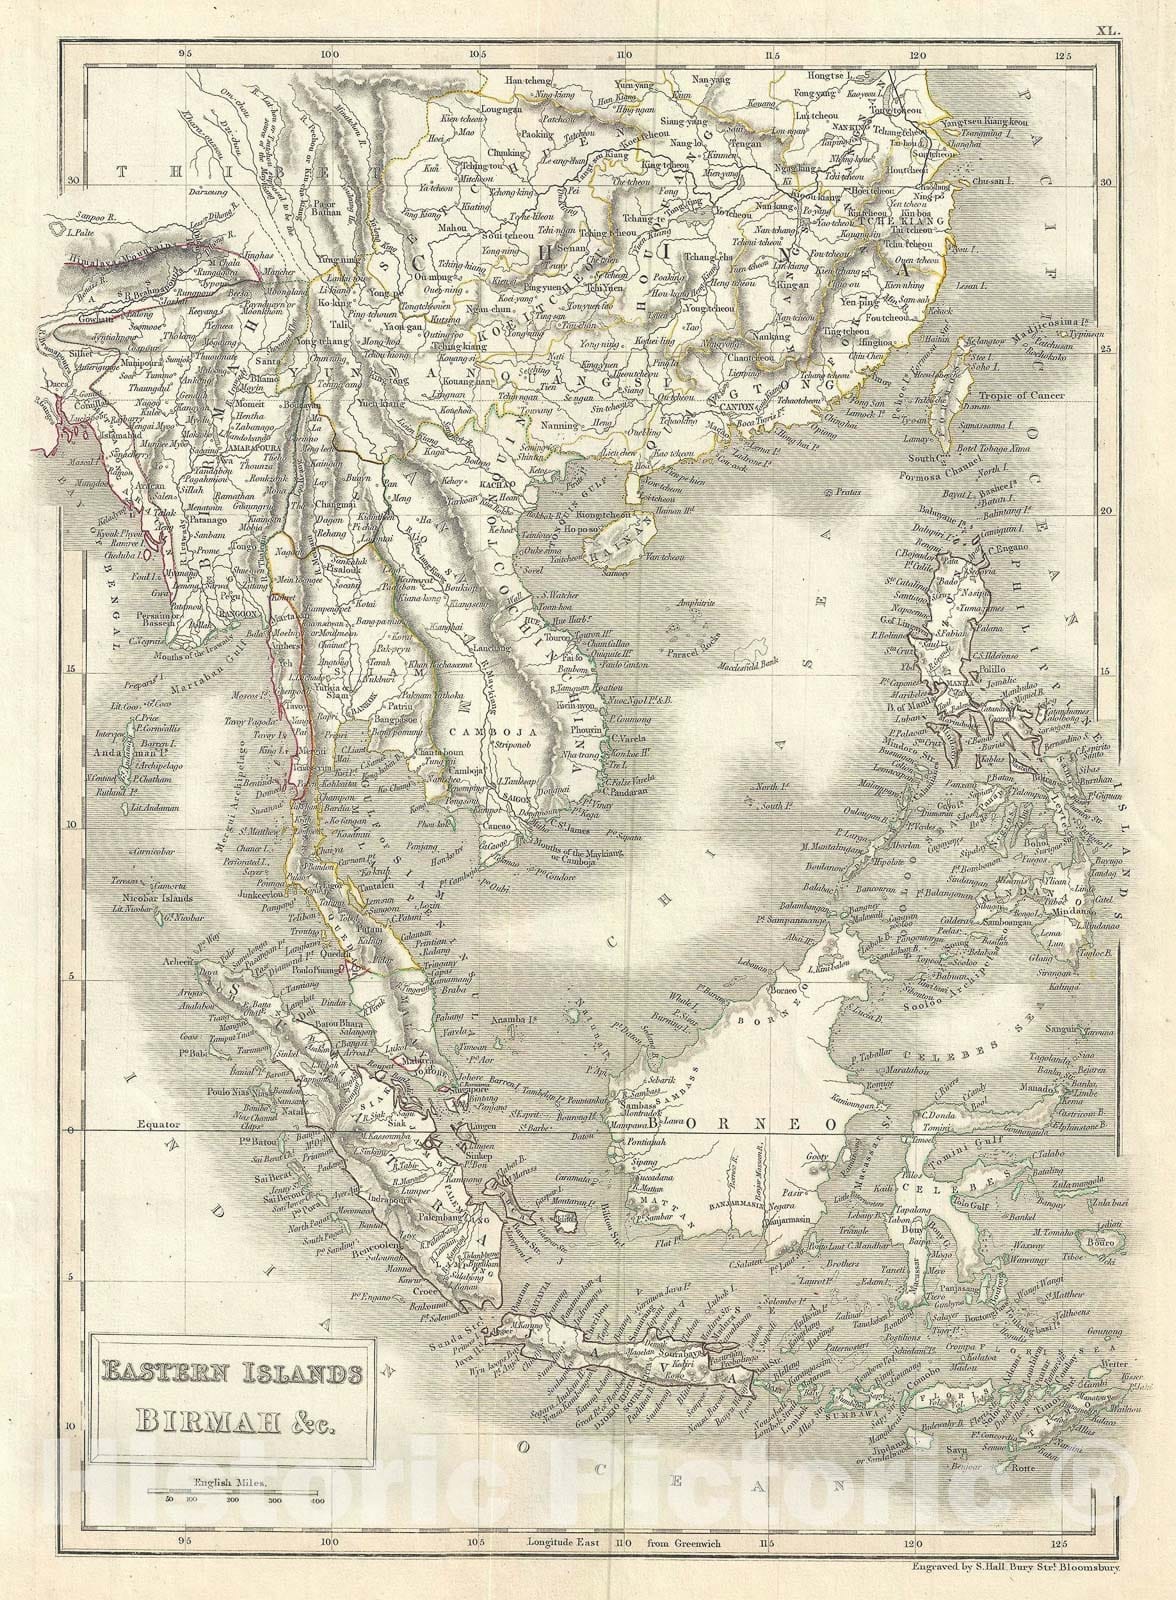 Historic Map : The East Indies and South East Asia, Black, 1844, Vintage Wall Art